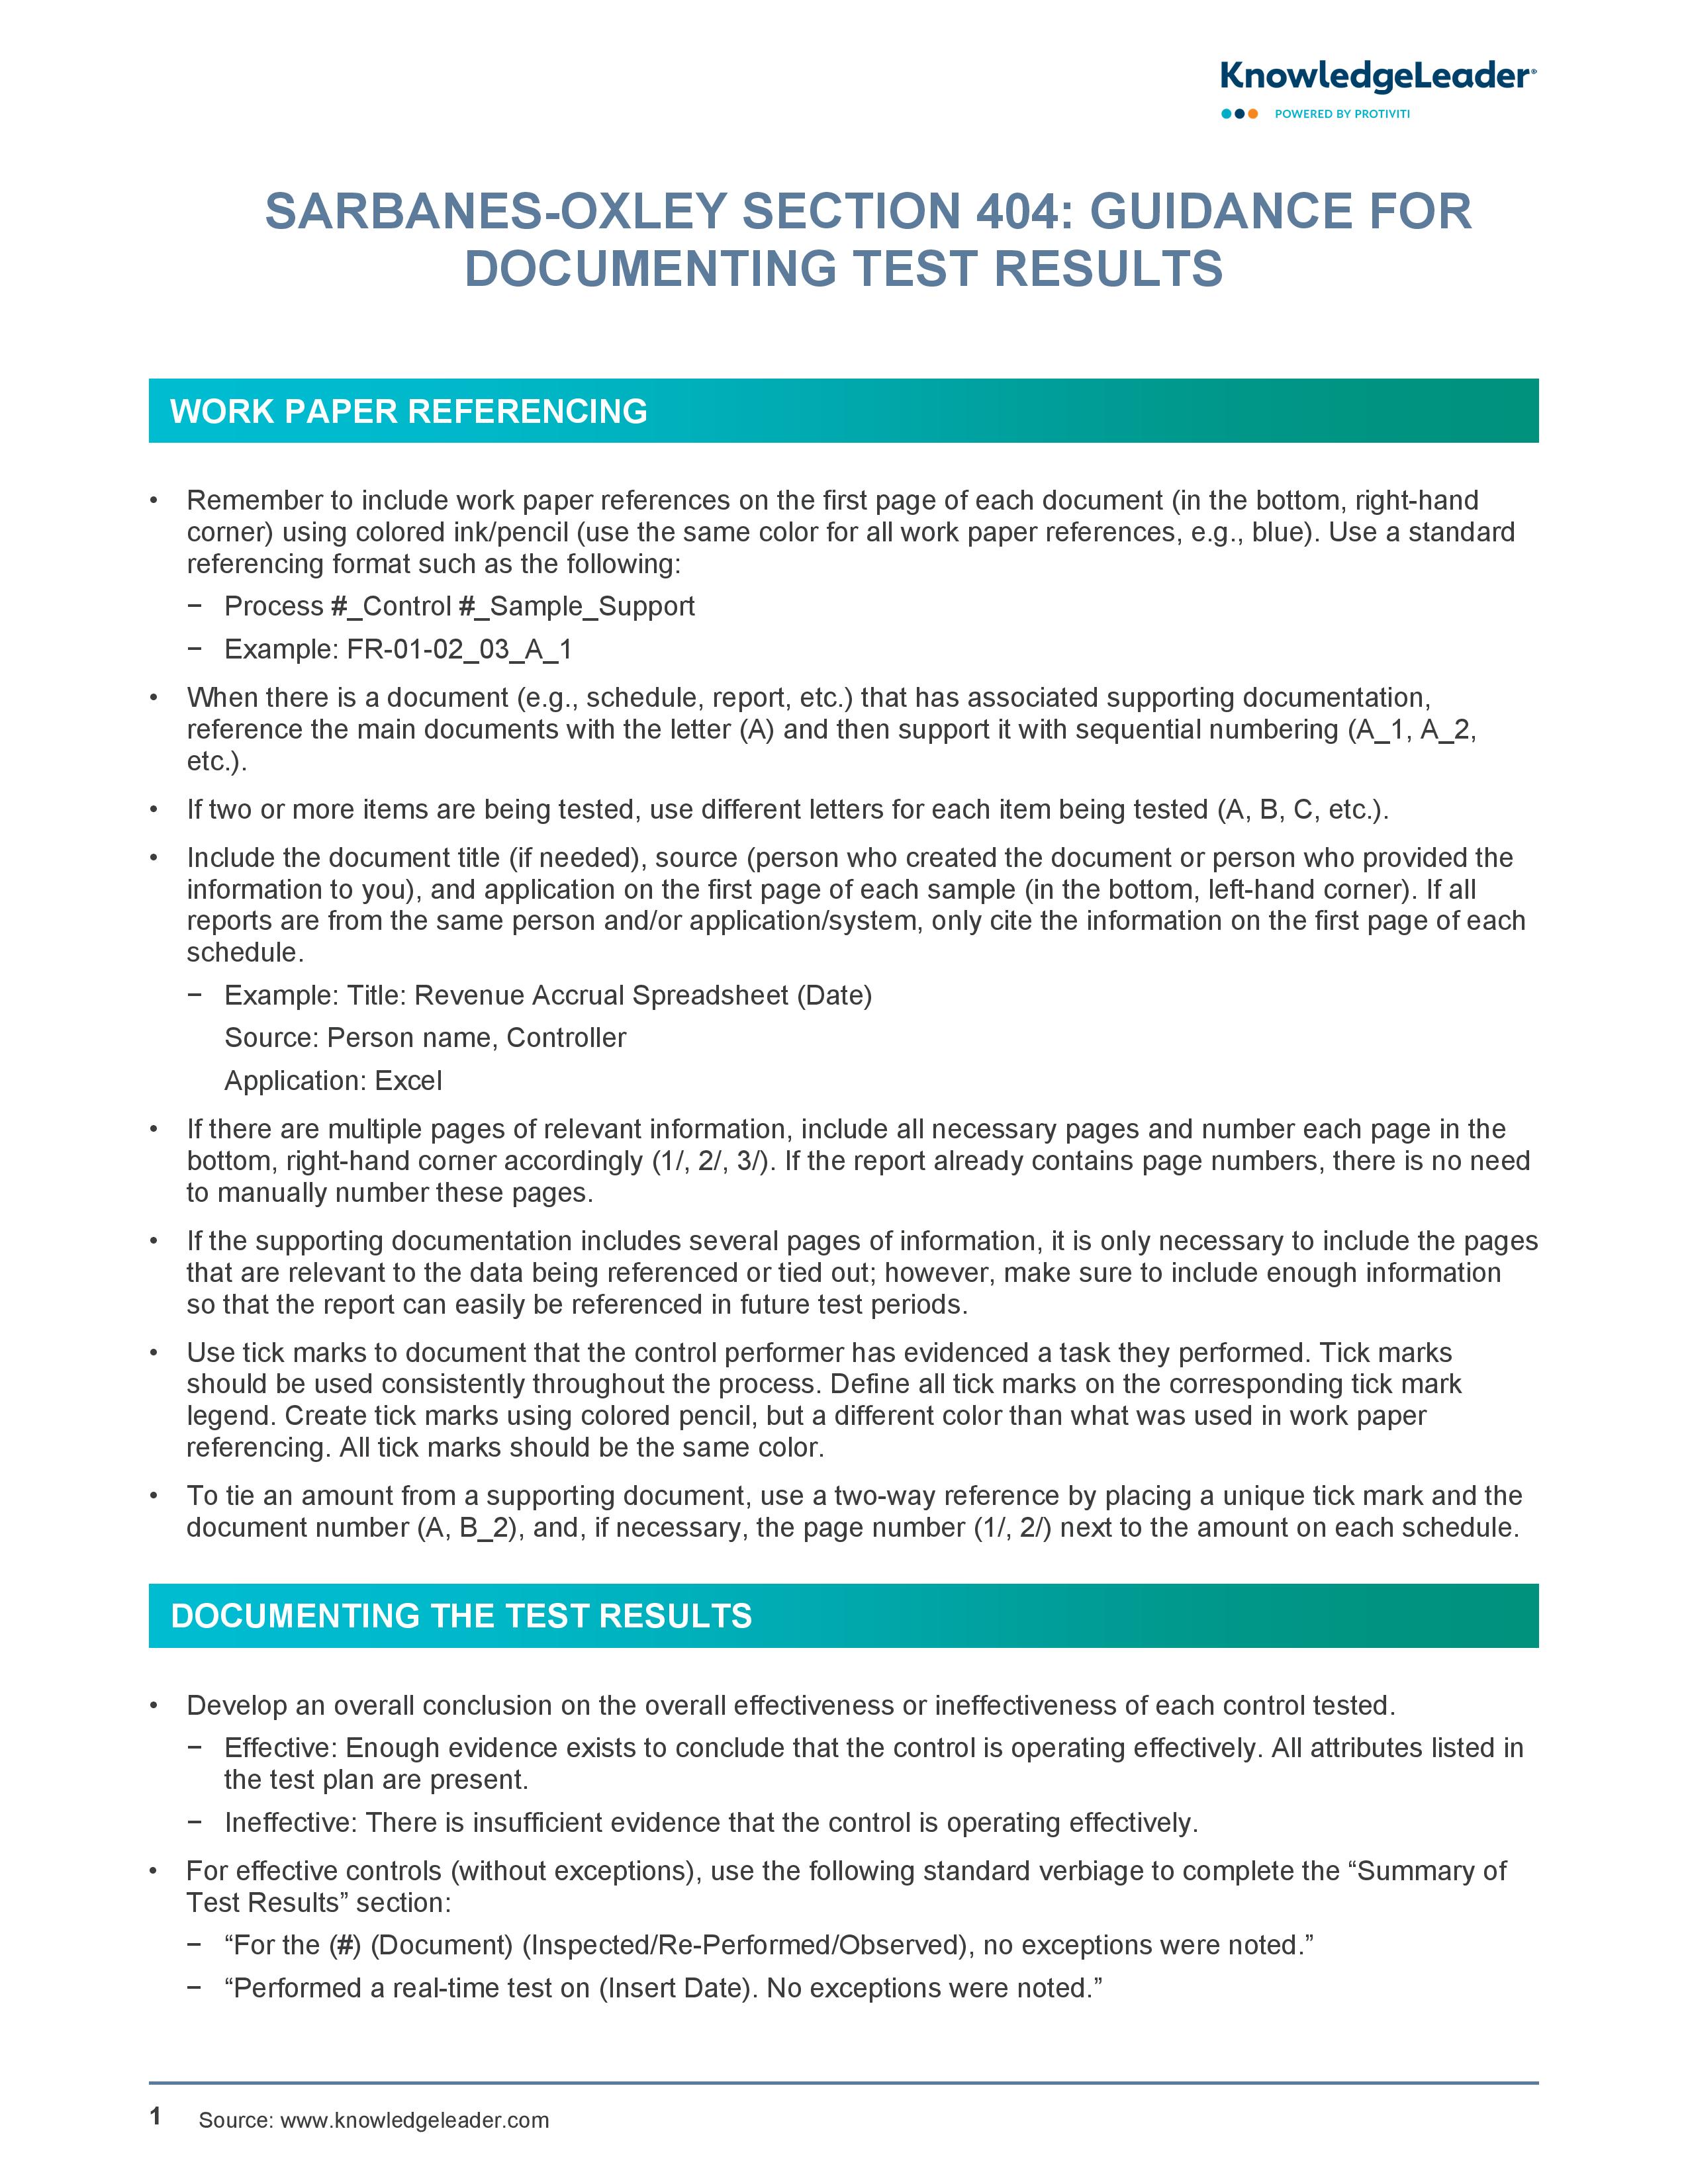 screenshot of the first page of Sarbanes-Oxley Section 404 Guidance for Documenting Test Results.